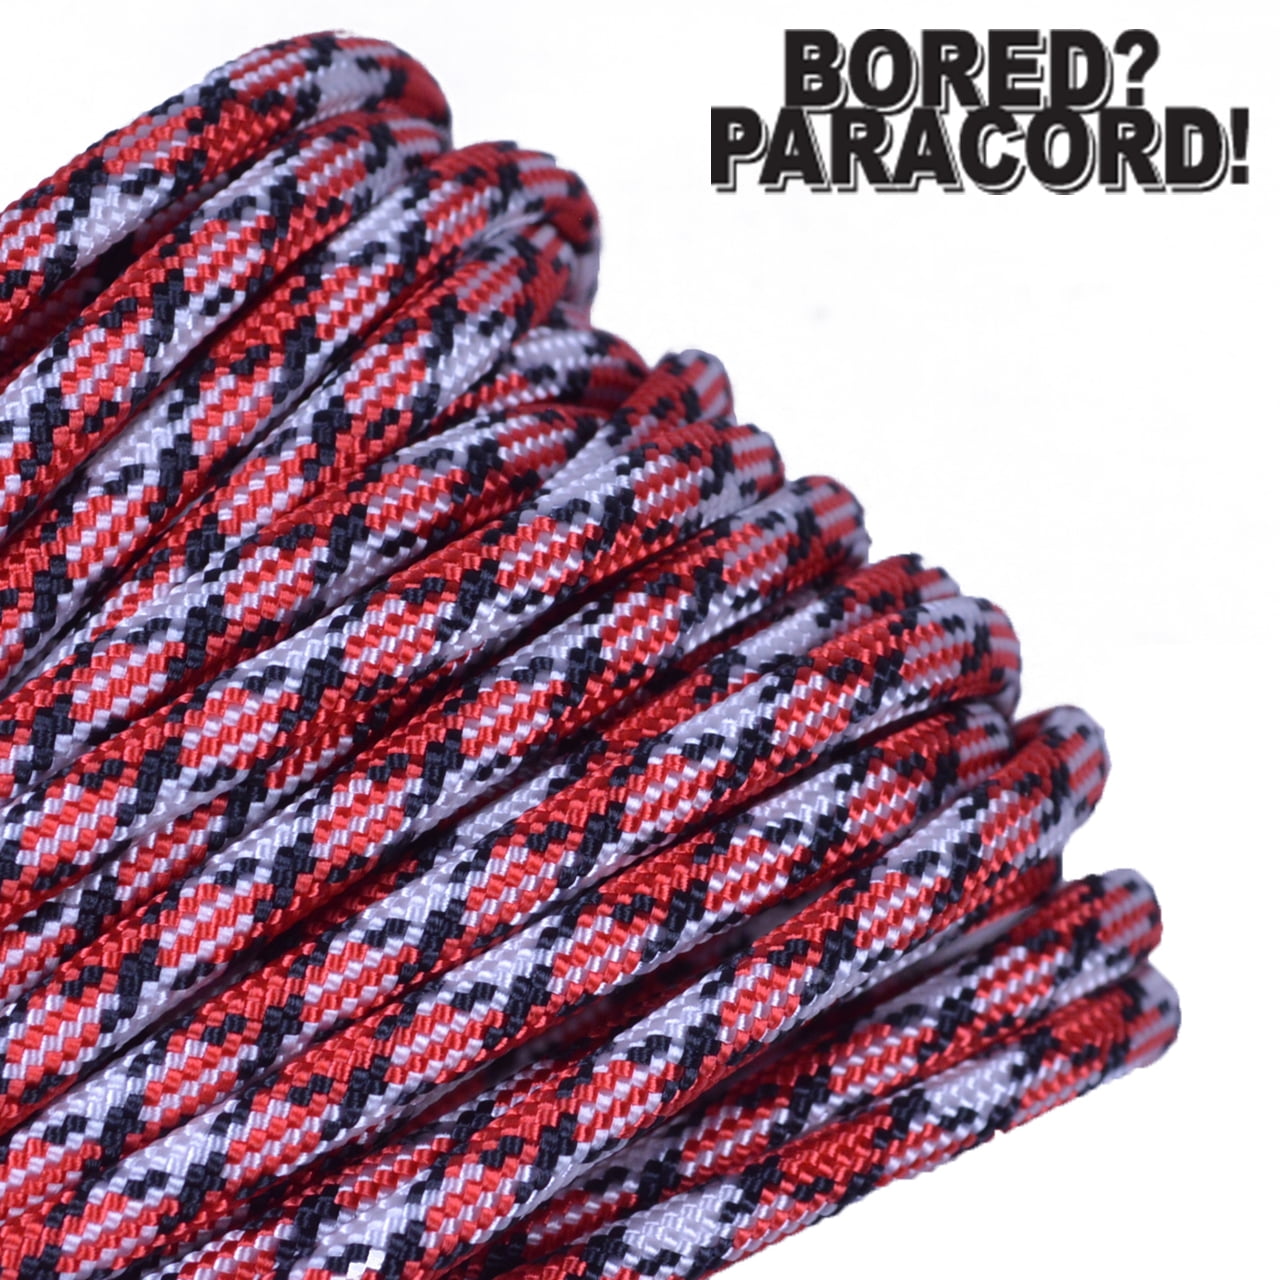 Coghlans American para cord 15 m US 50 ft Heavy duty 7 Strand 550 pounds 